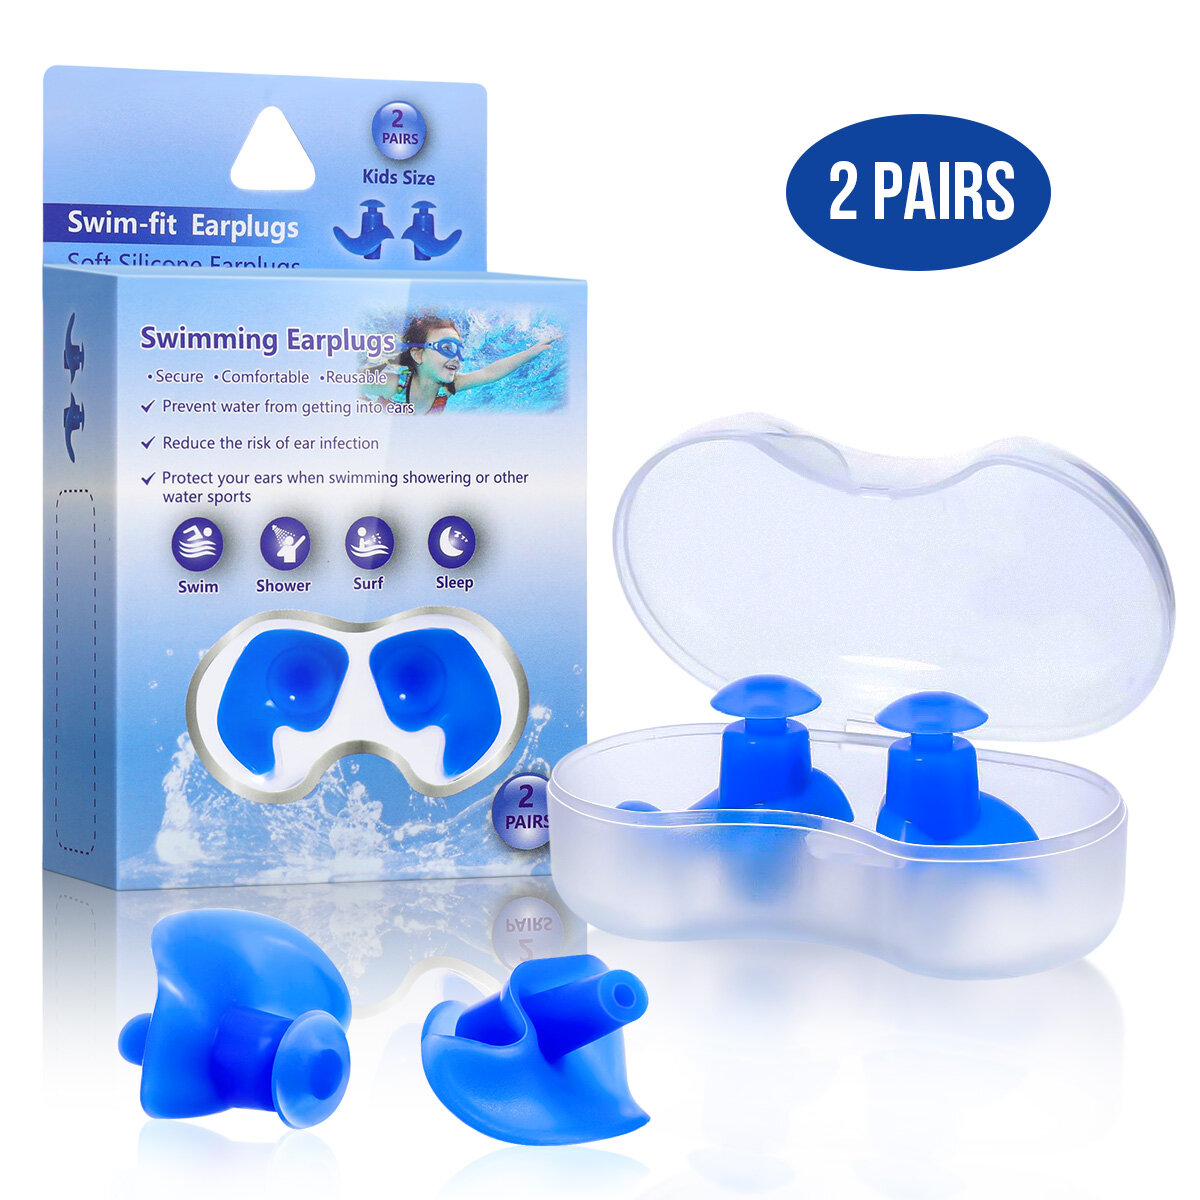 2 Pairs Kids Upgraded Silicone Swimming EarPlugs Waterproof Reusable Silicone Ear Plugs for Swimming Showering Surfing S